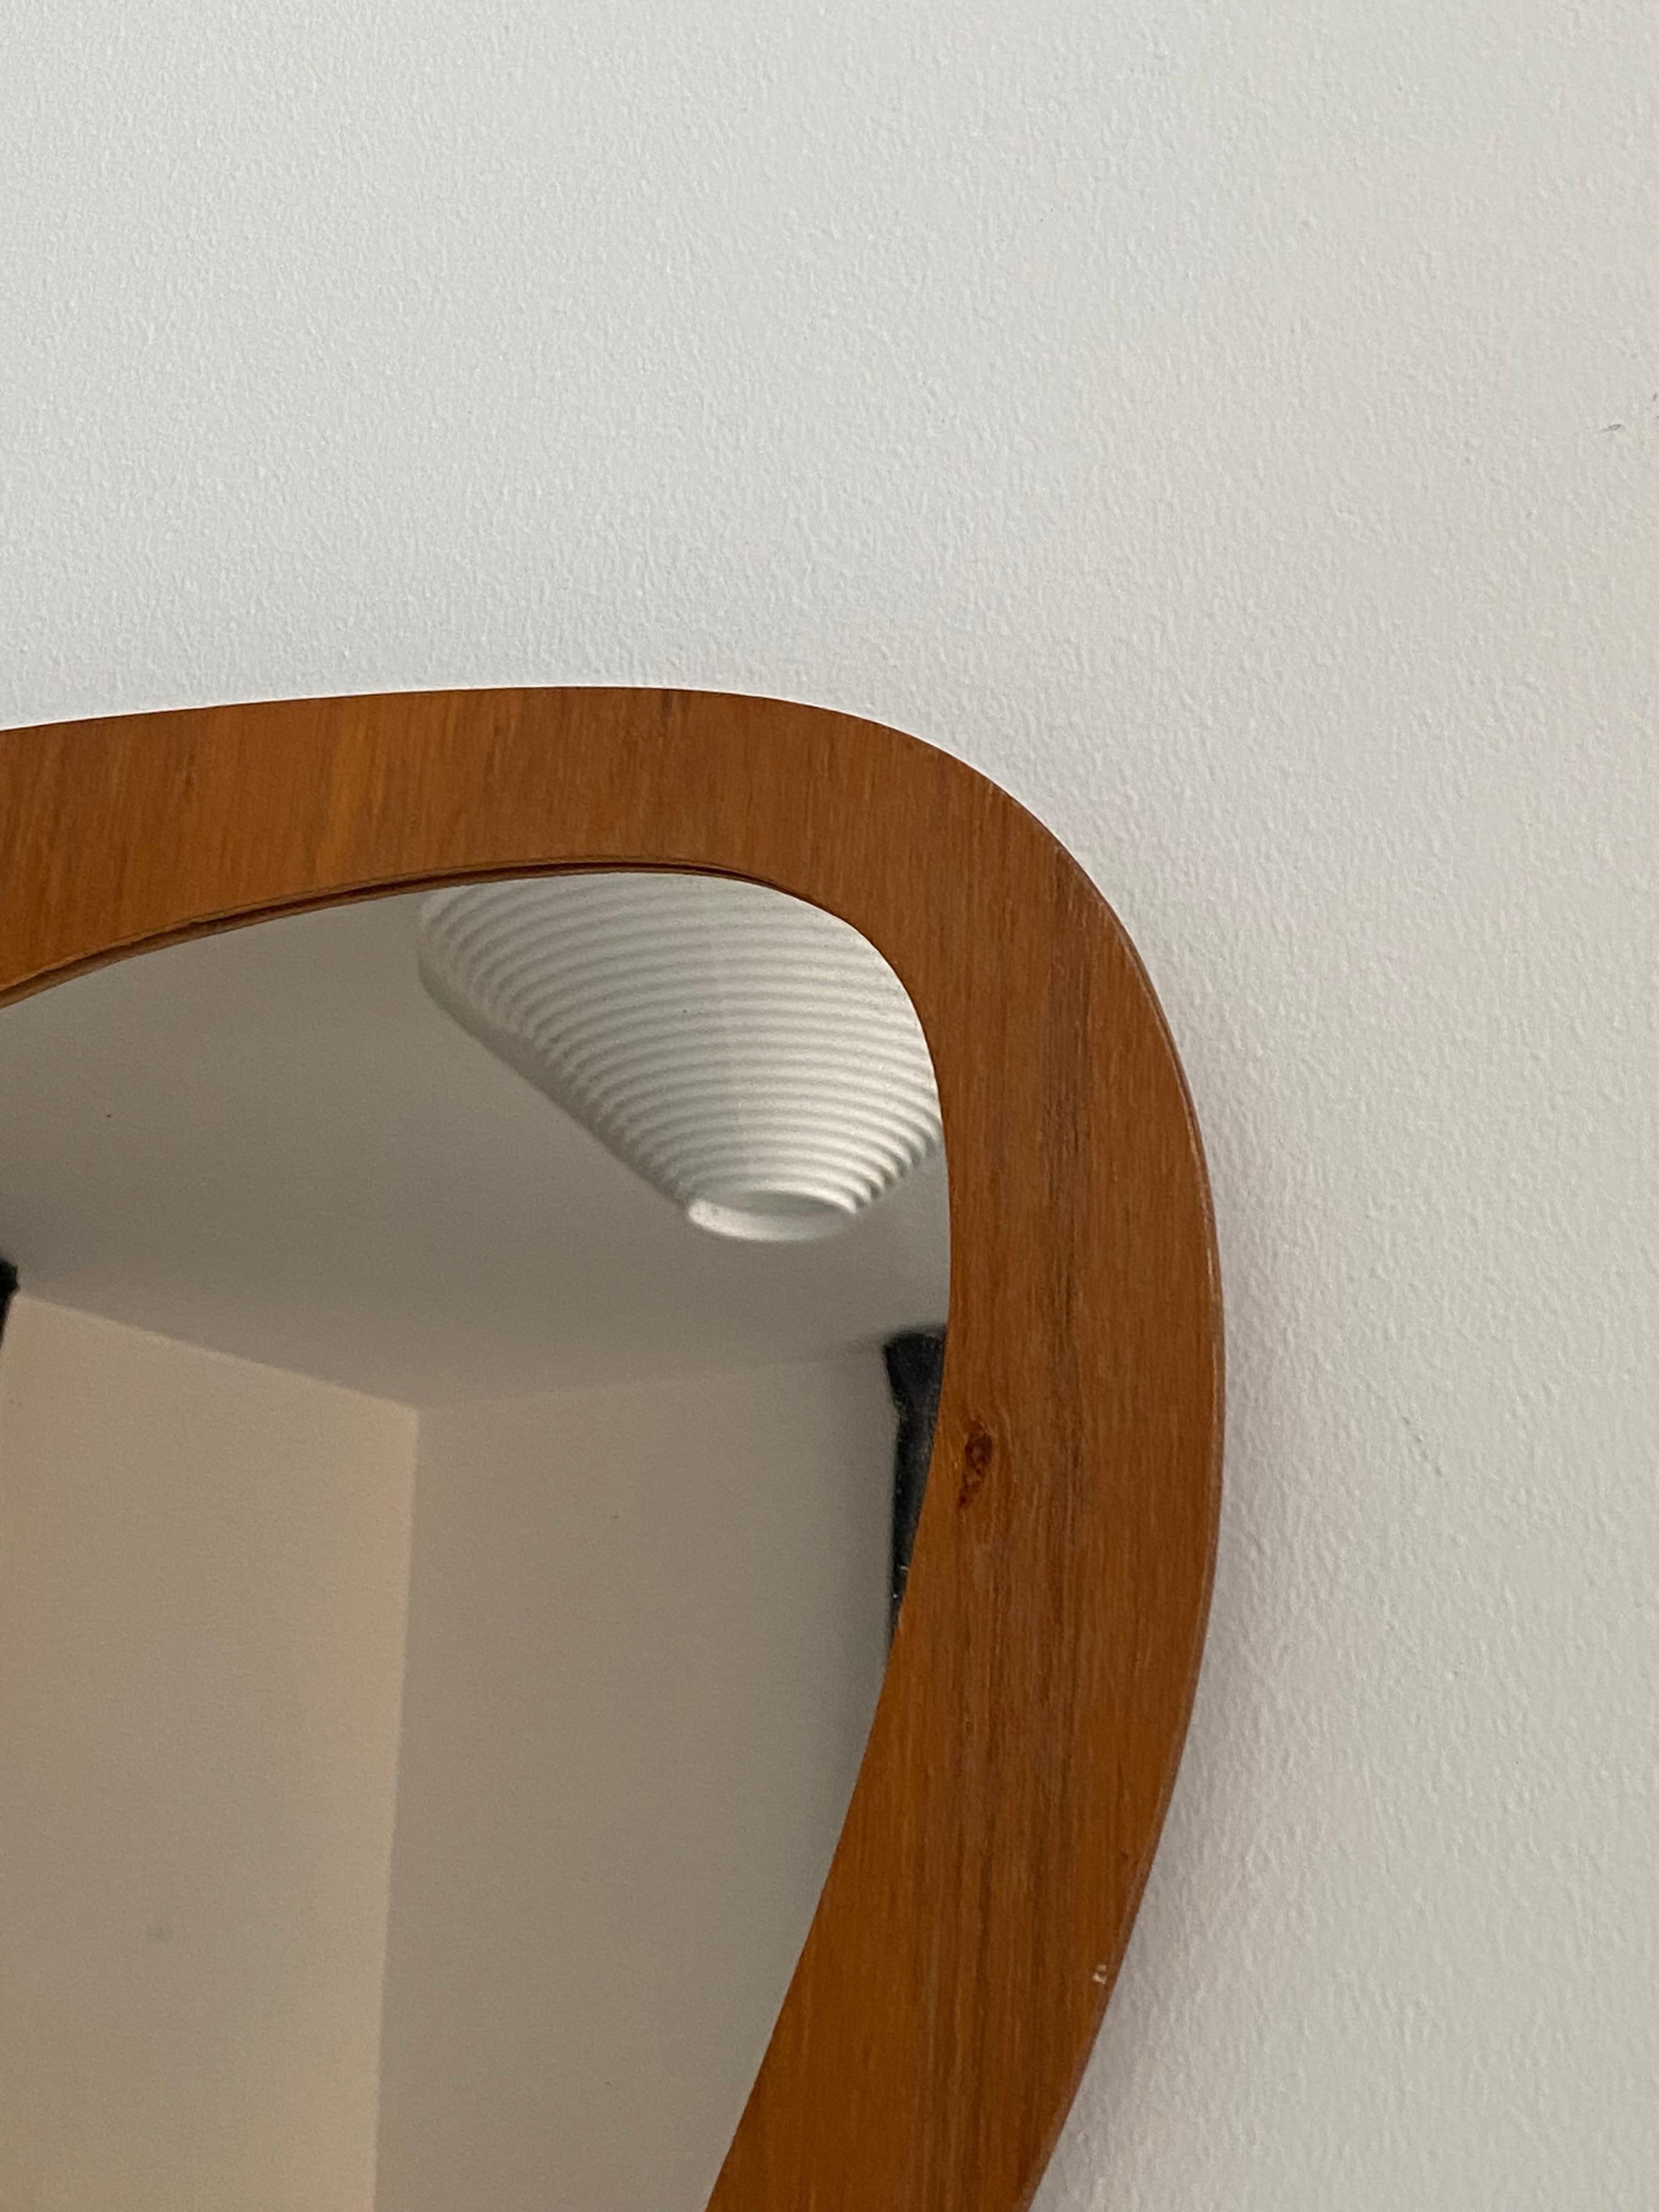 An organic wall mirror. Designed and produced in Sweden, c. 1950s-1960s.

 